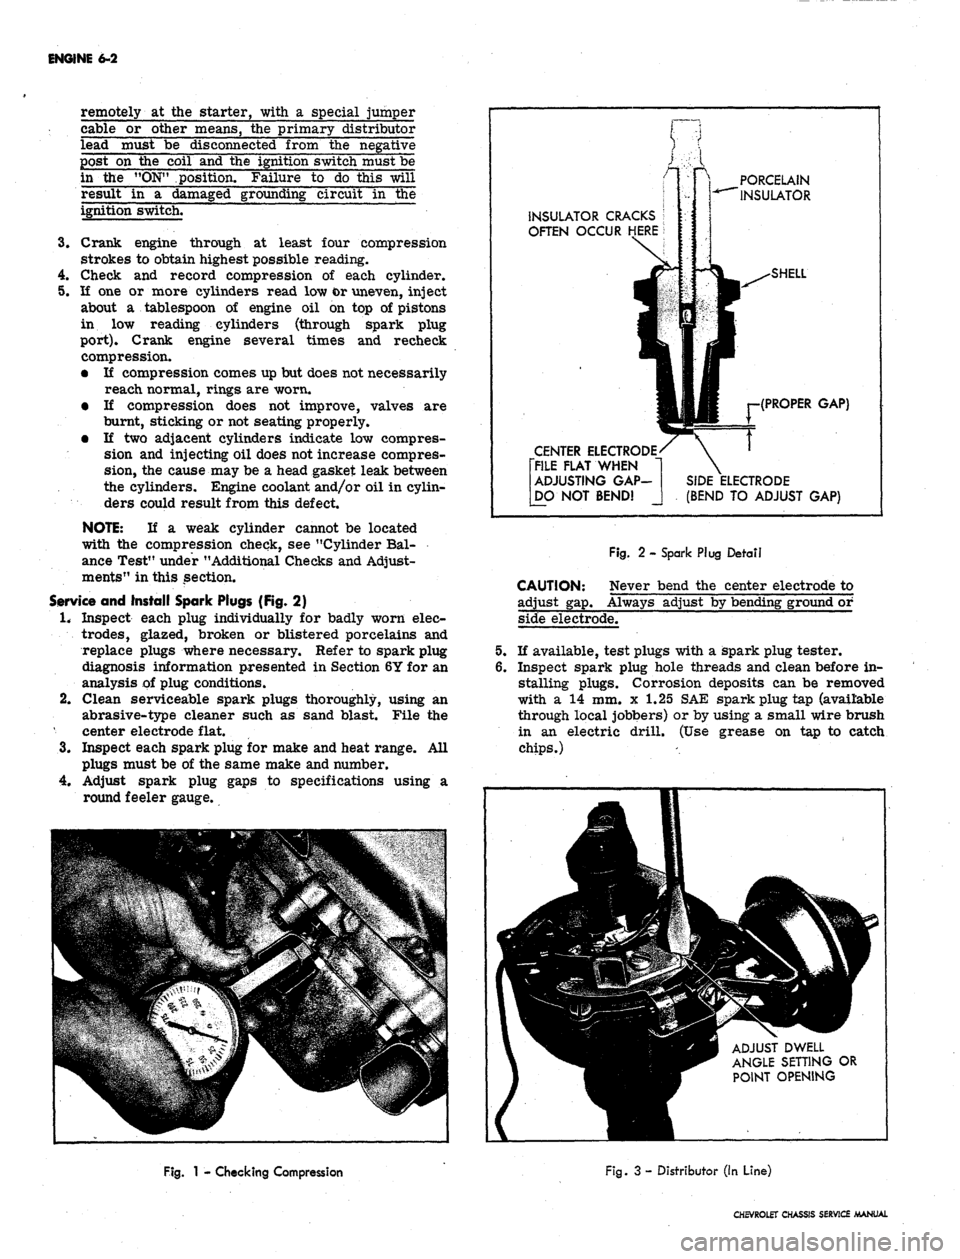 CHEVROLET CAMARO 1967 1.G Chassis Repair Manual 
ENGINE 6-2

remotely at the starter, with a special jumper

cable or other means, the primary distributor

lead must be disconnected from the negative

post on the coil and the ignition switch must b